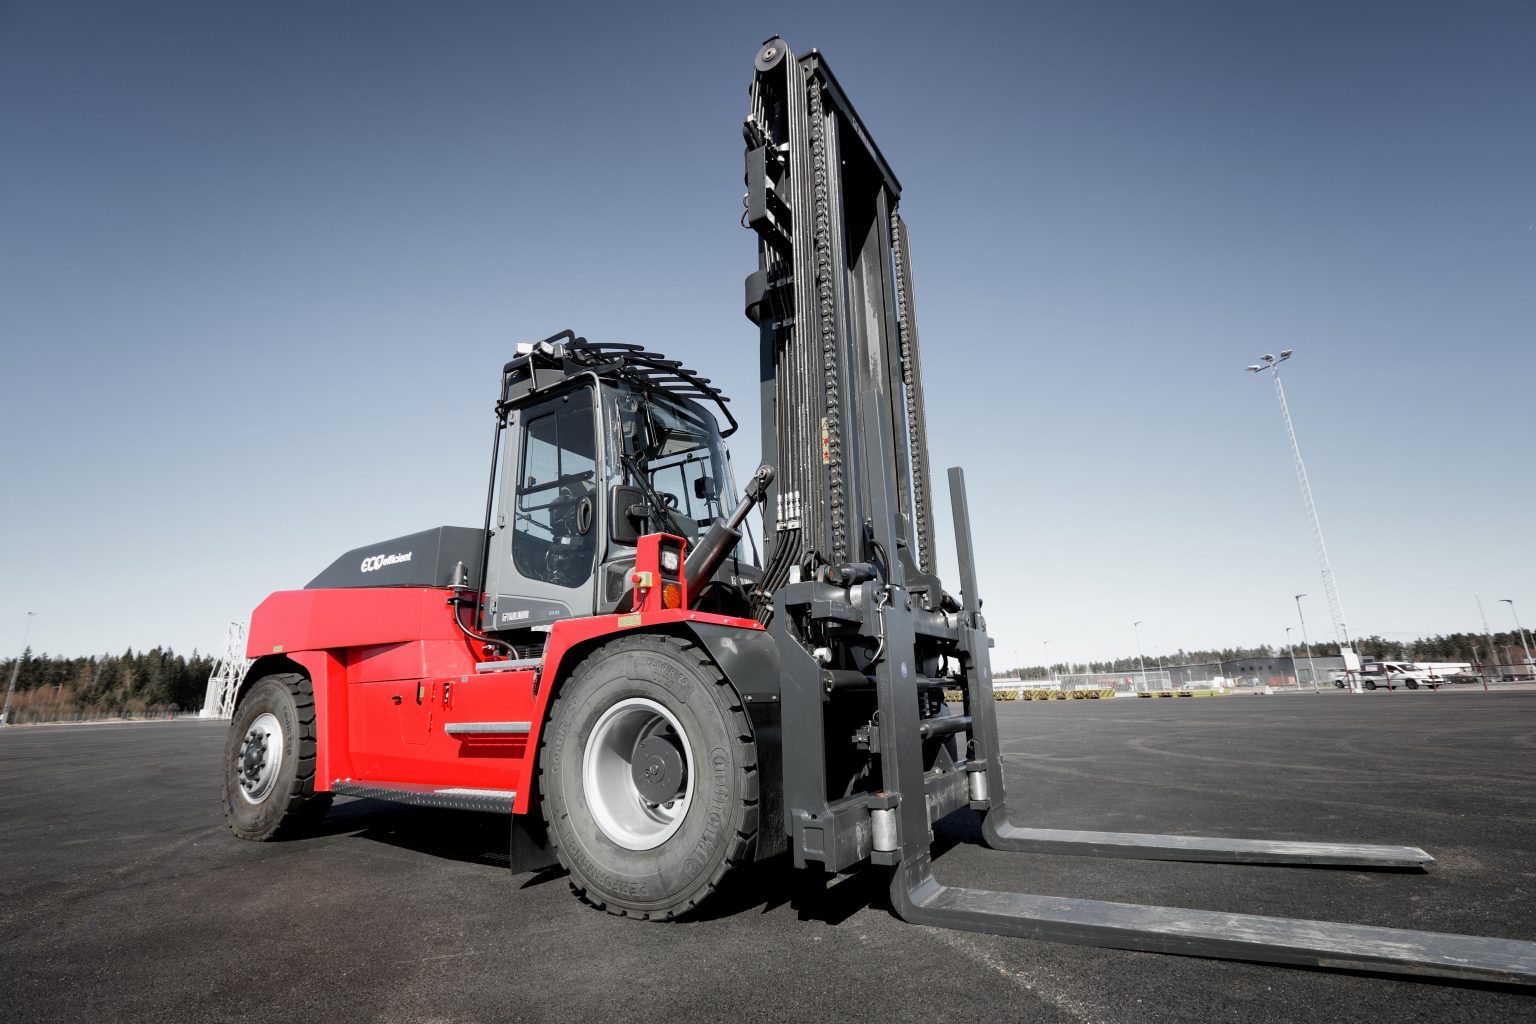 Kalmar’s Electric Forklift Technology To Help Construction Materials Supplier SEAC Reduce The Carbon Footprint Of Its Operations